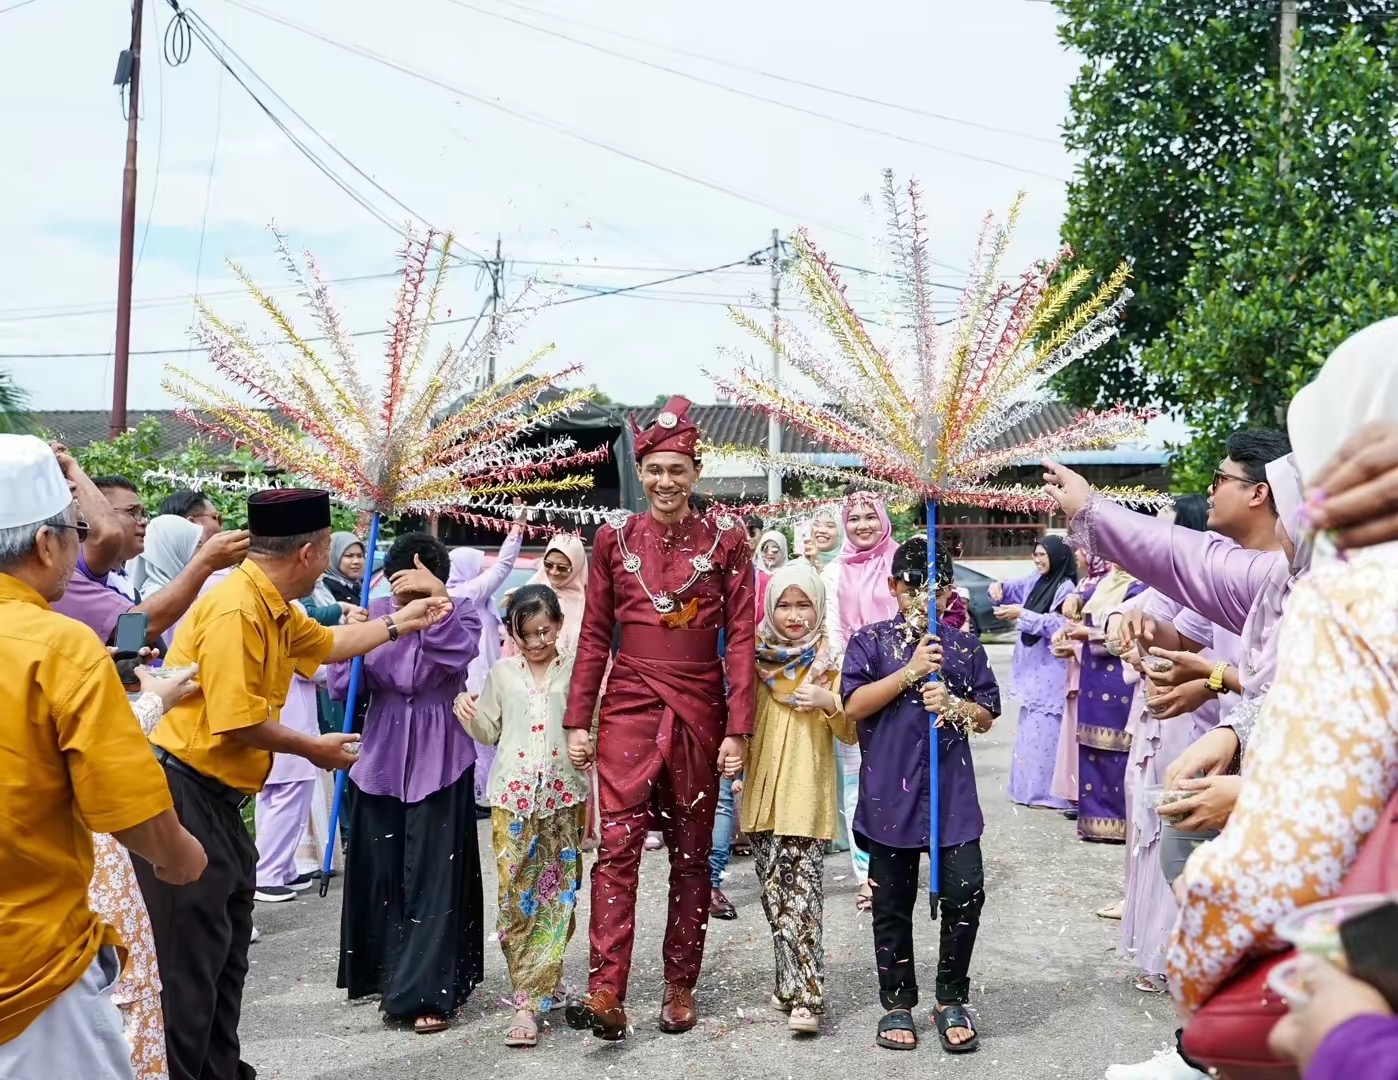 Malay man in traditional wedding attire alone heading to his wedding ceremony